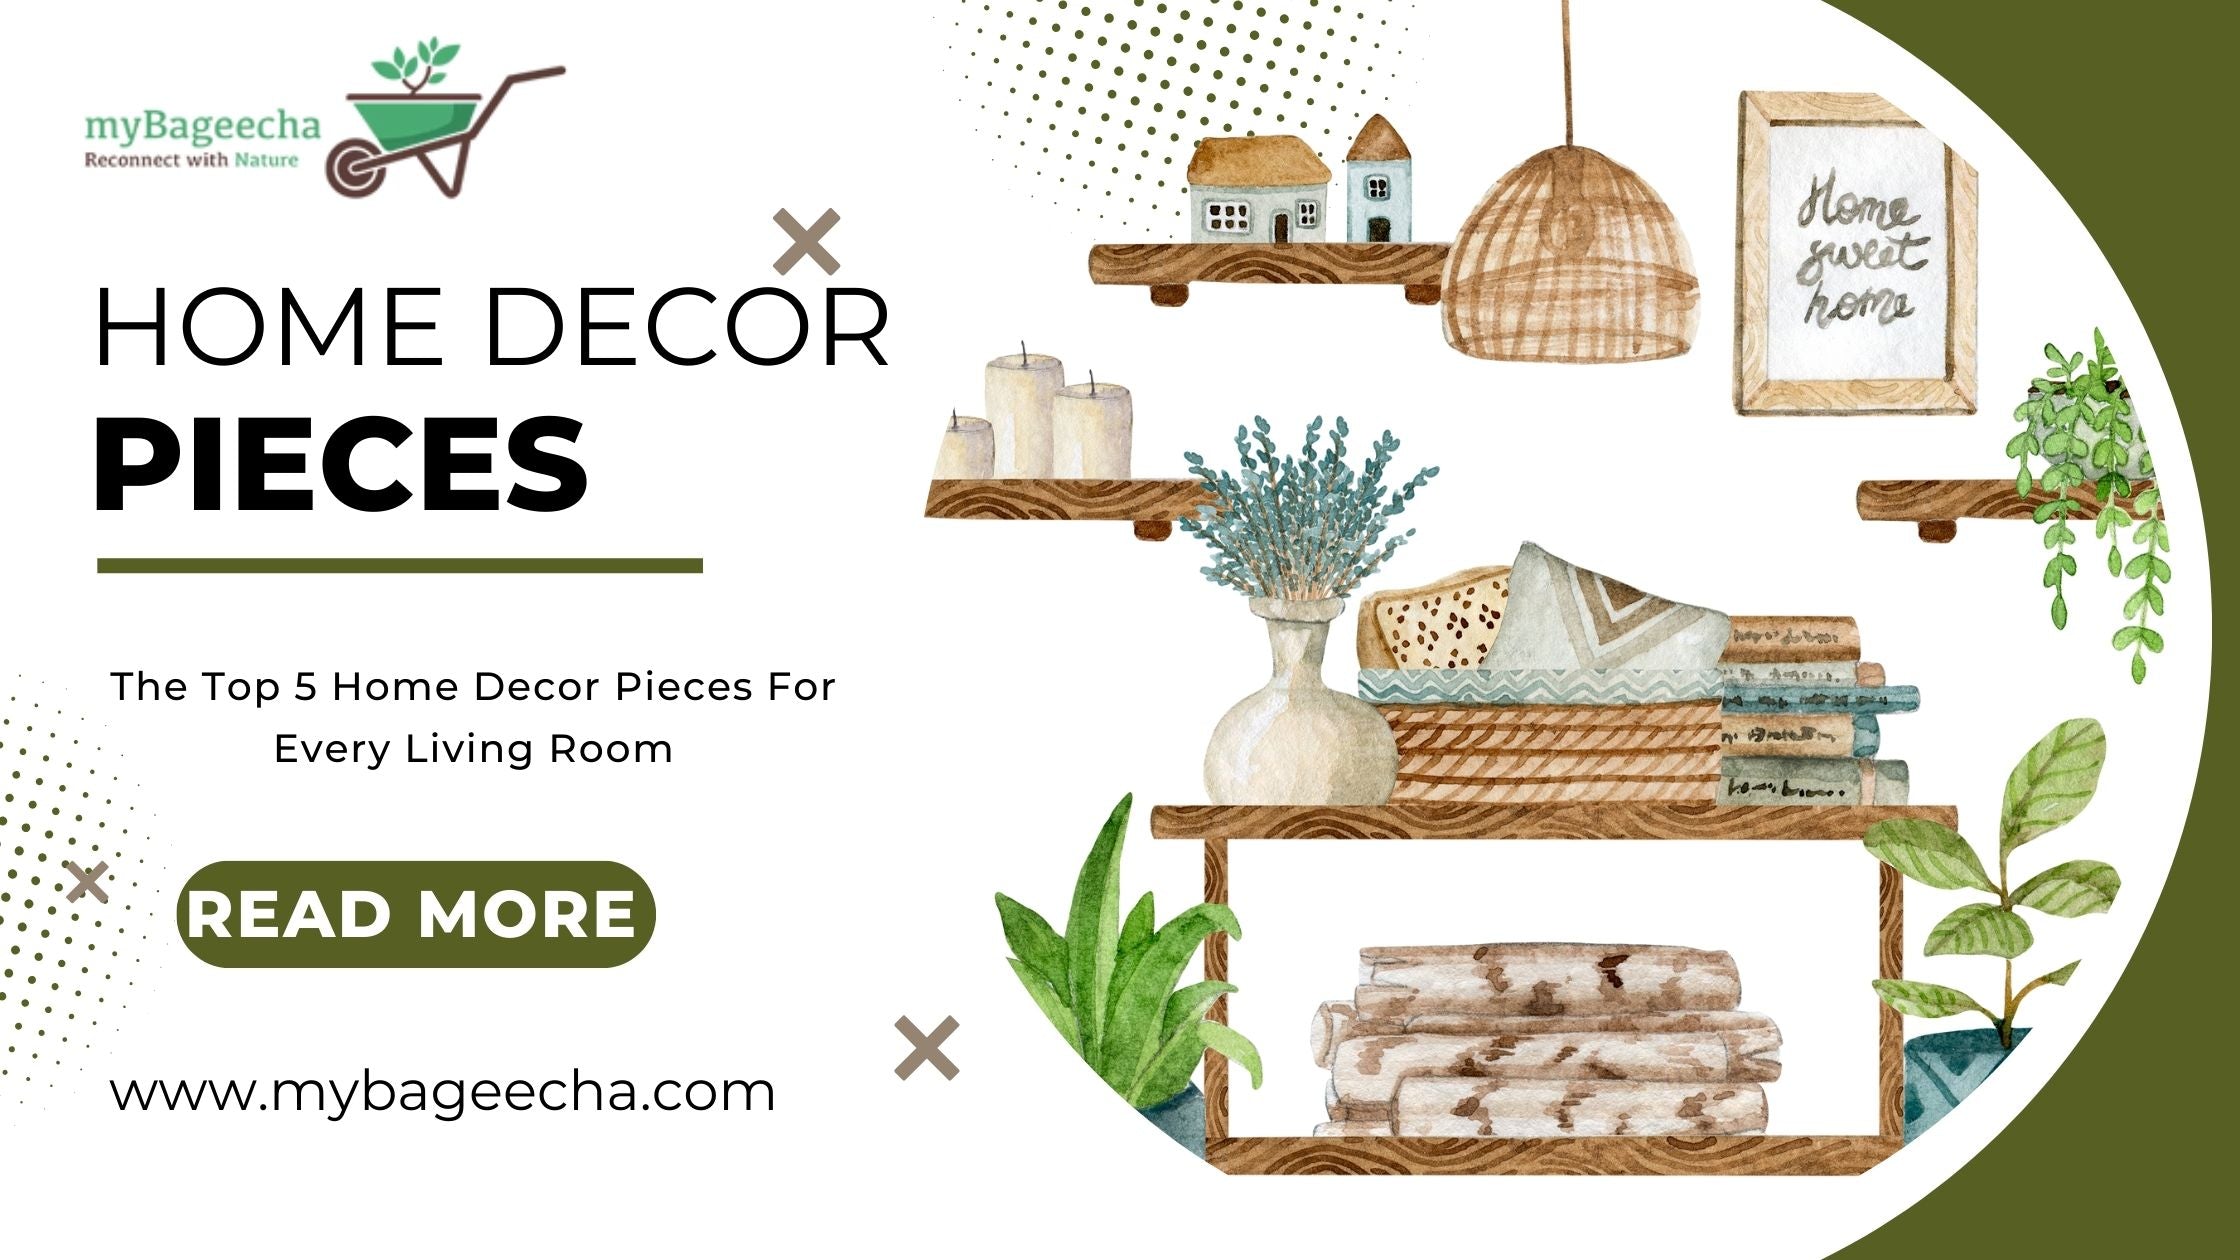 The Top 5 Home Decor Pieces For Every Living Room